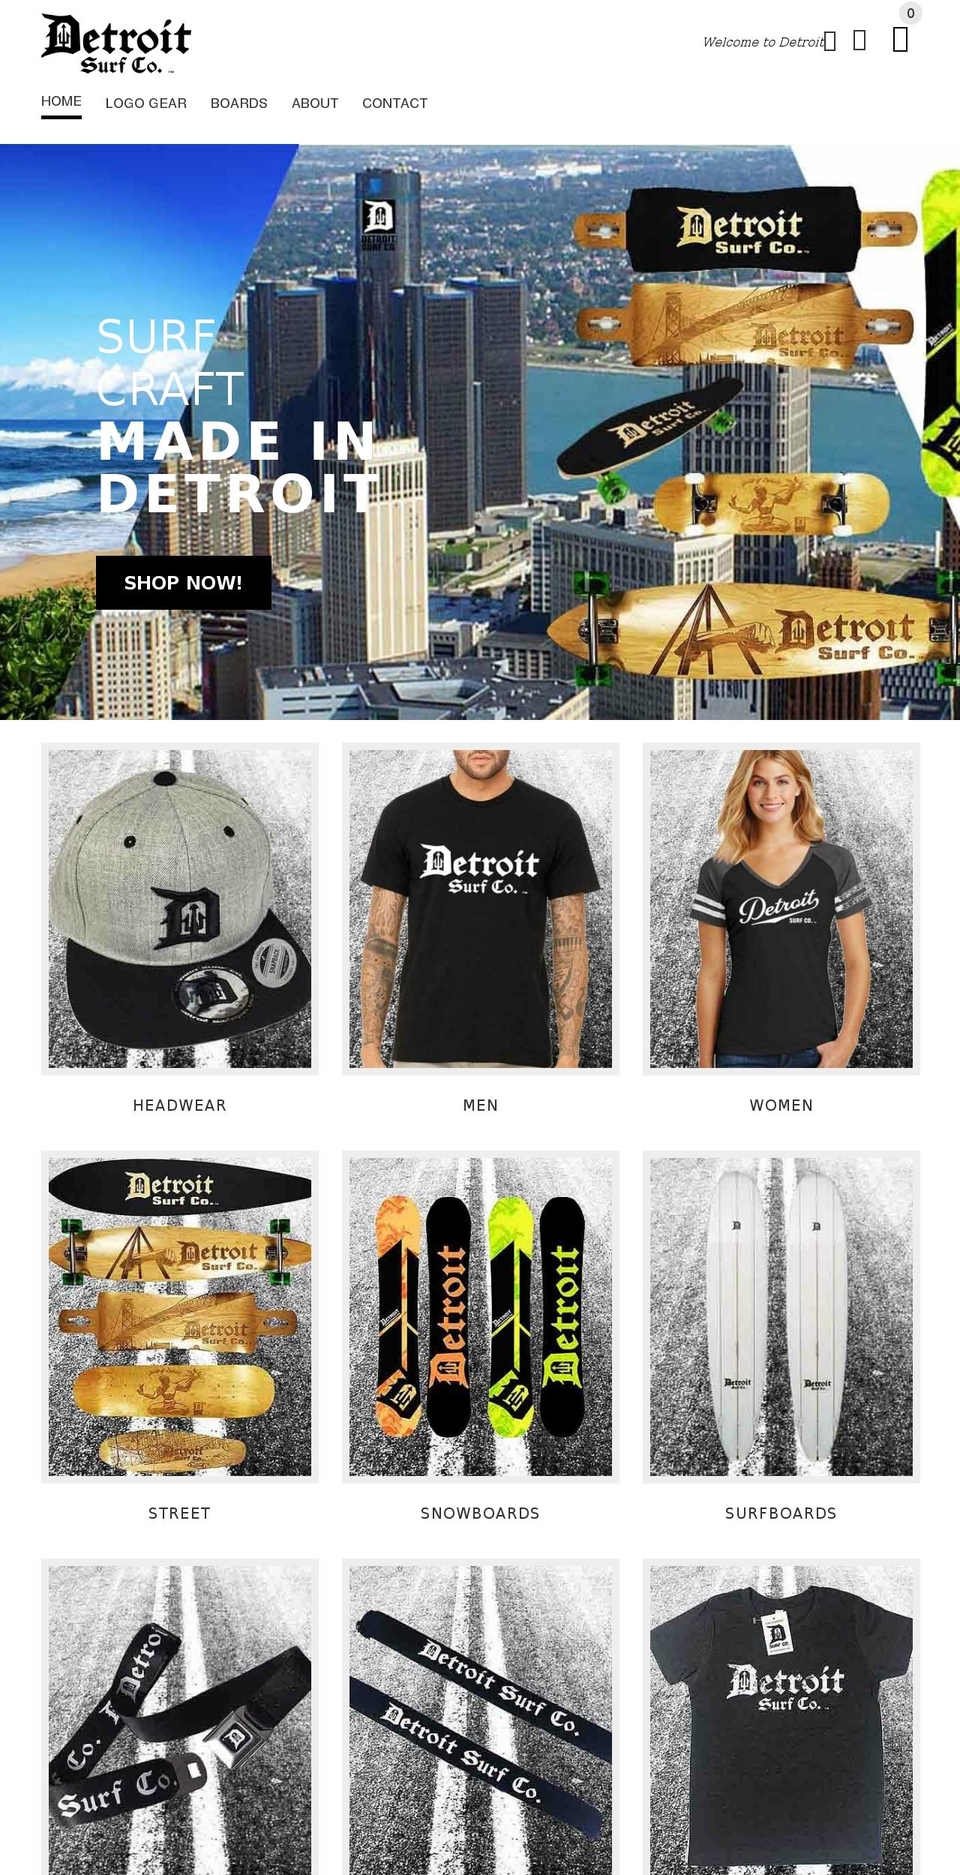 yourstore-v1-4-8 Shopify theme site example detroitwakeboardco.com